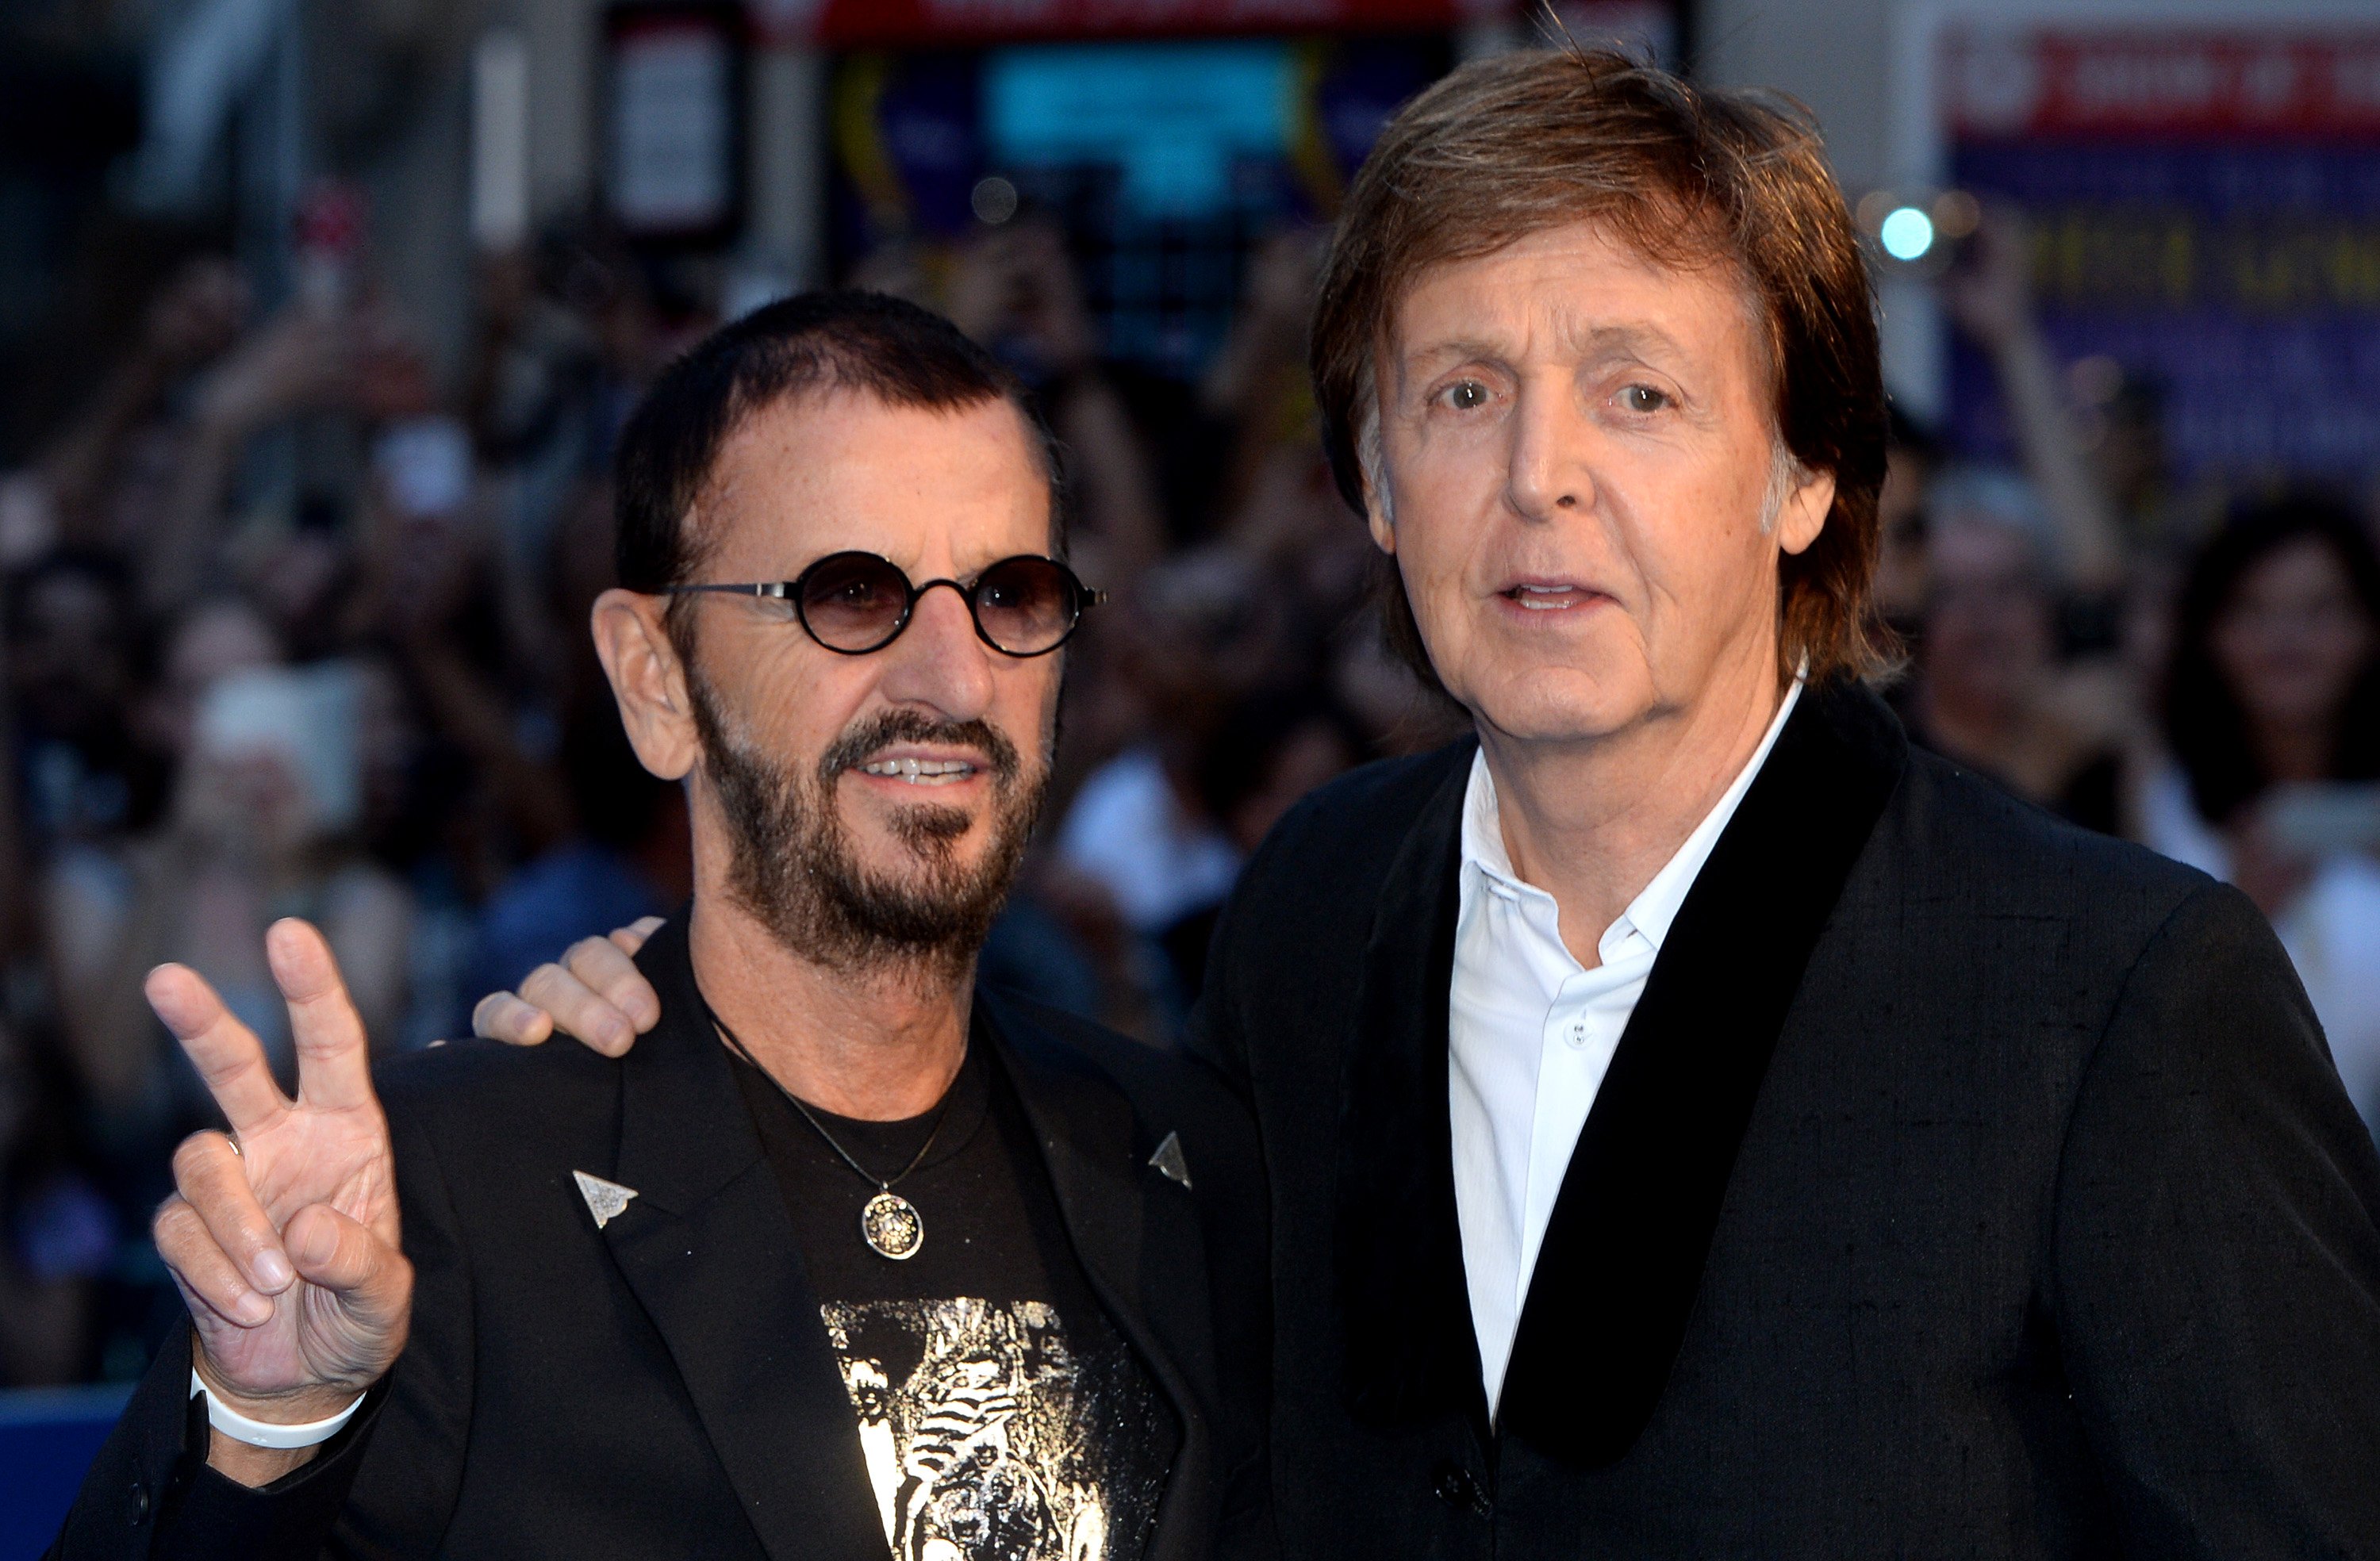 Ringo Starr holds up a peace sign and Paul McCartney holds his hand around his shoulder.